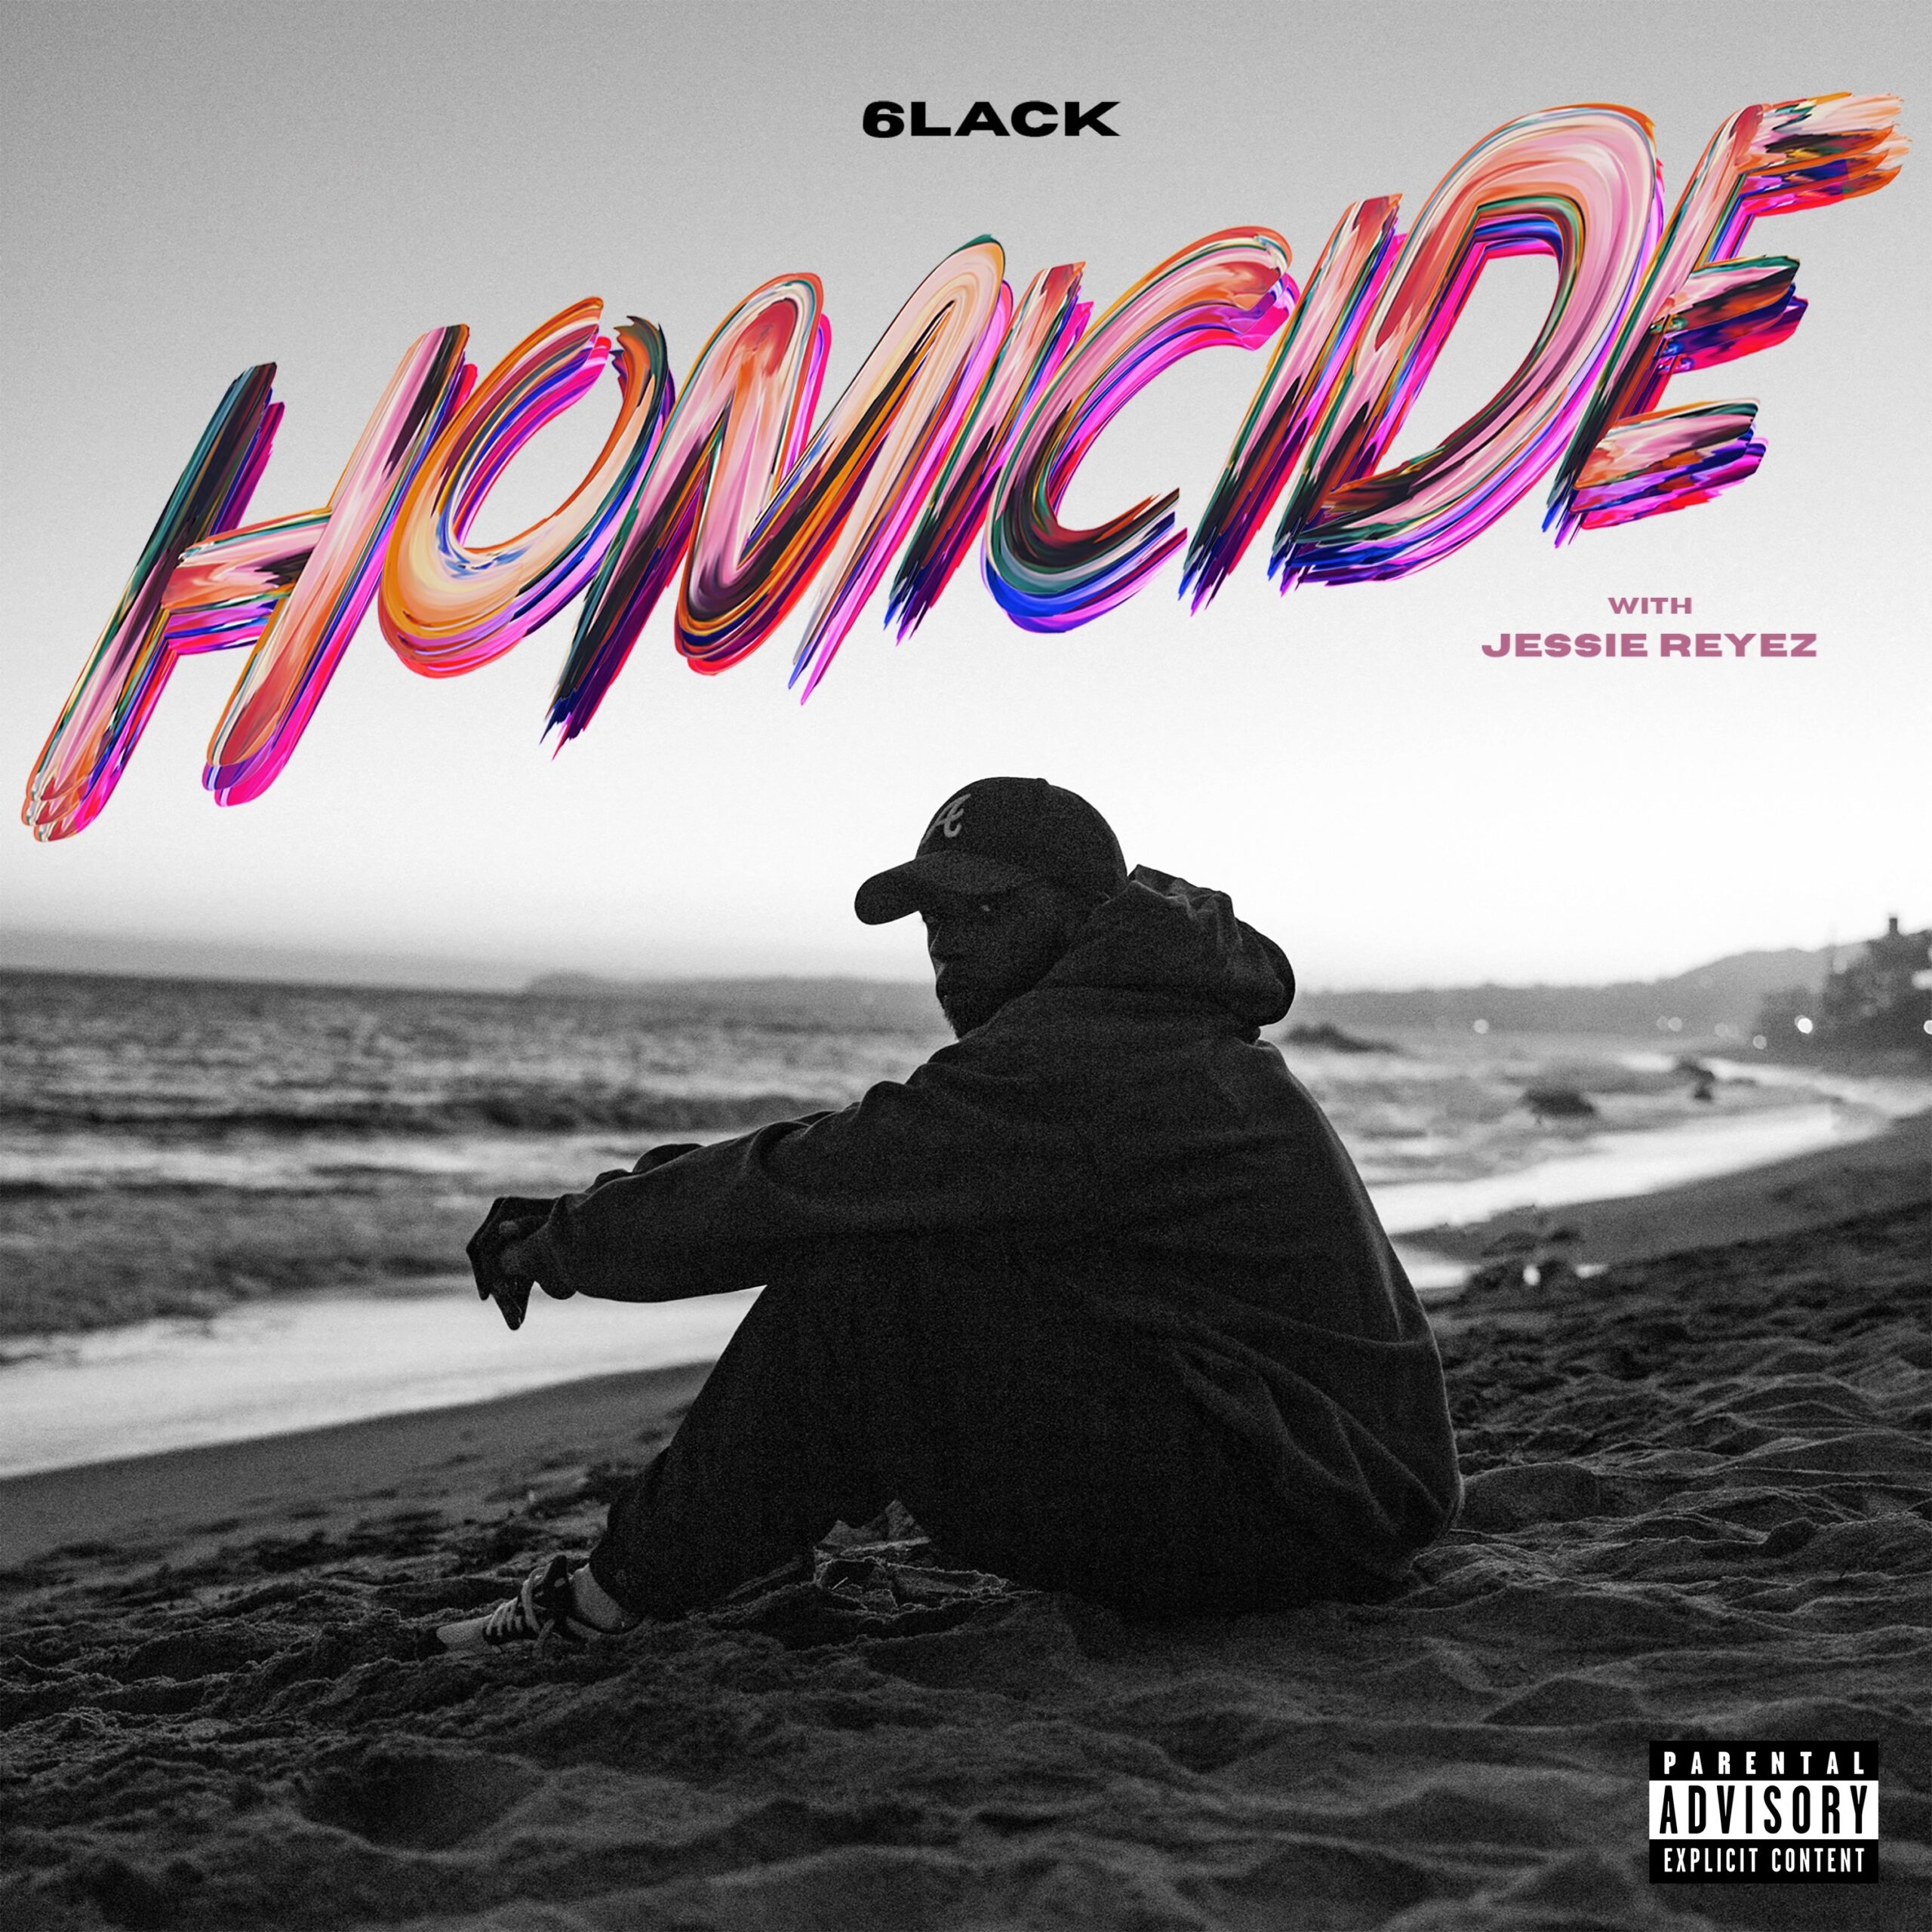 6LACK Drops “Homicide” With Jessie Reyez And “Mean It”